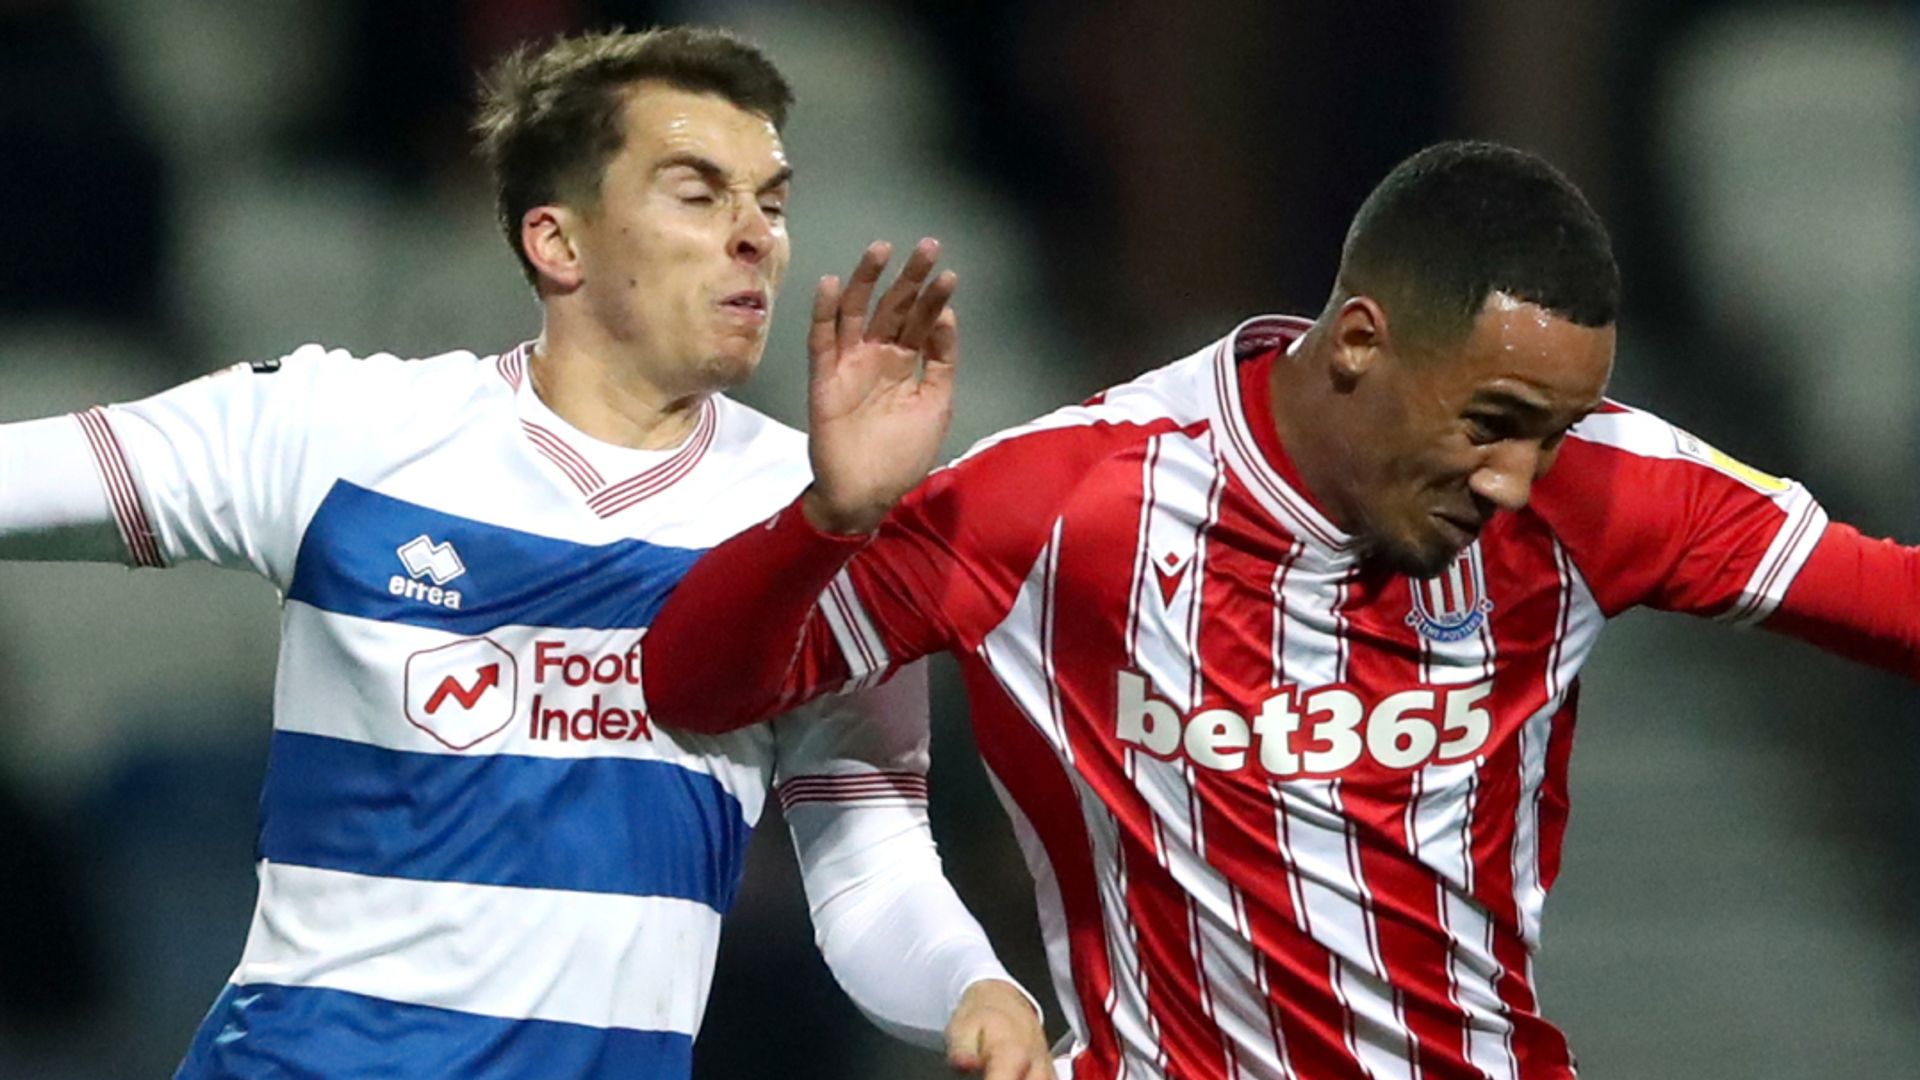 QPR hold Stoke to goalless draw